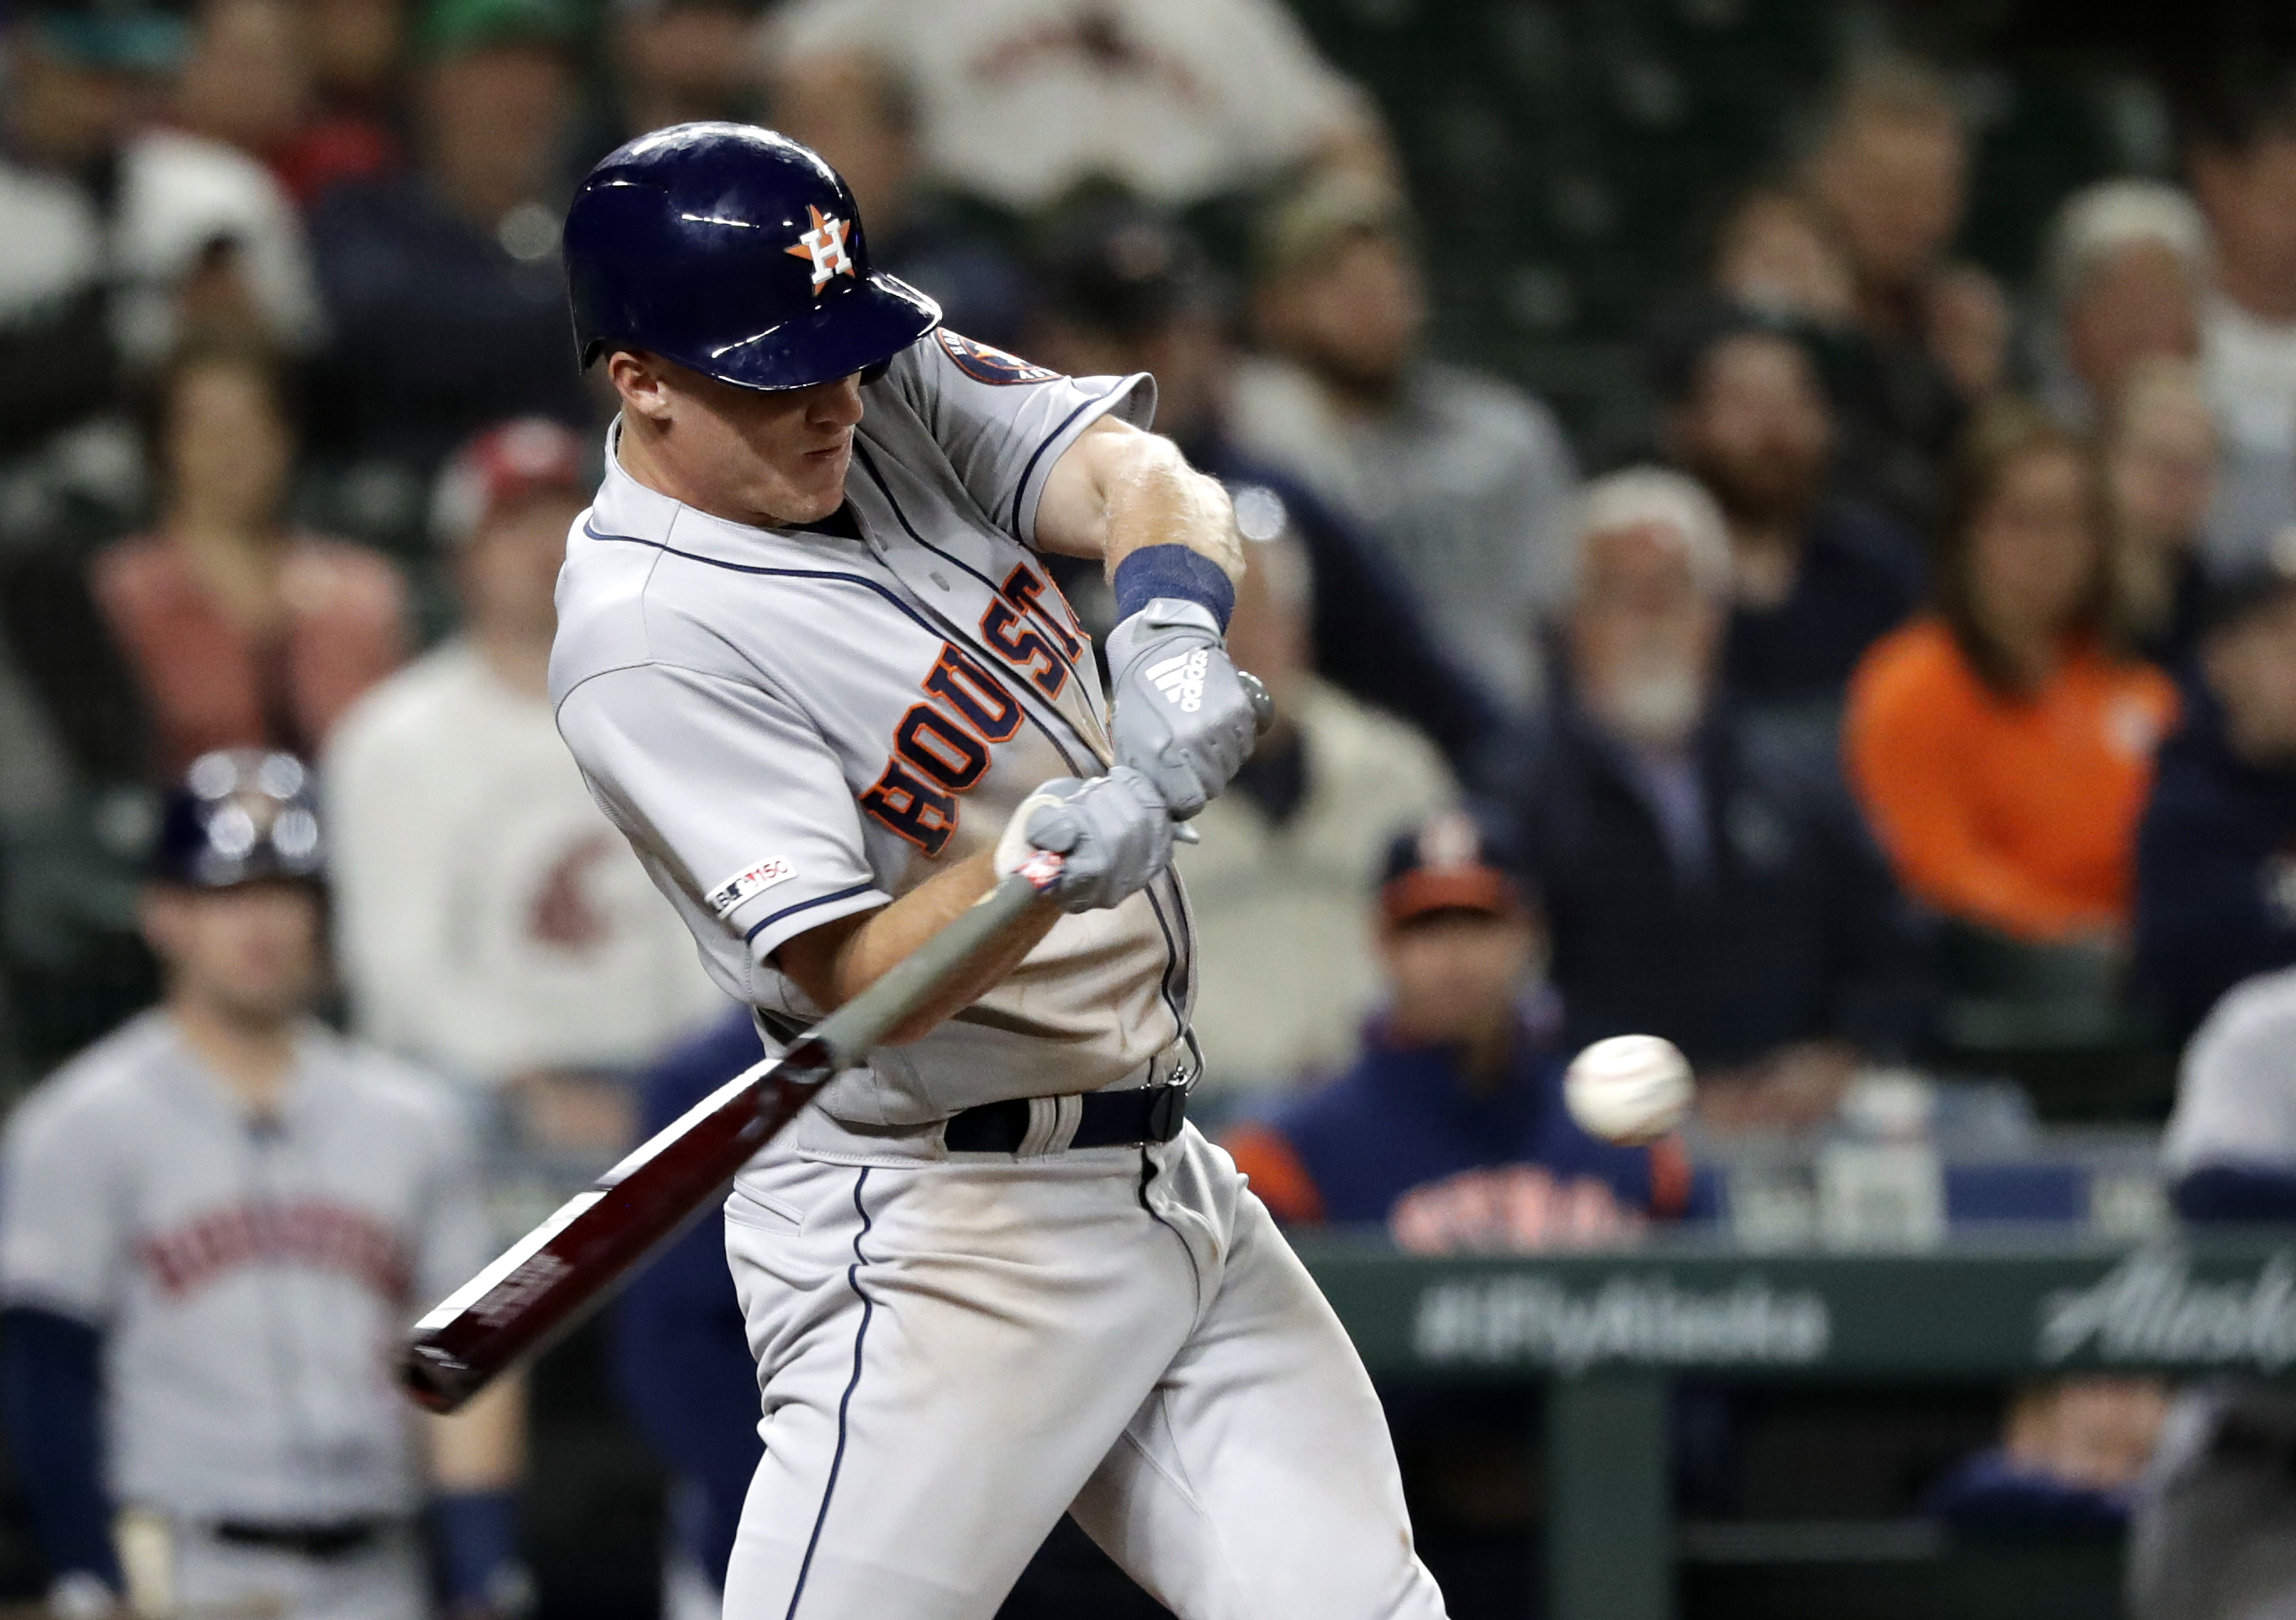 Bregman, Astros beat Mariners 11-5 for 5th straight win